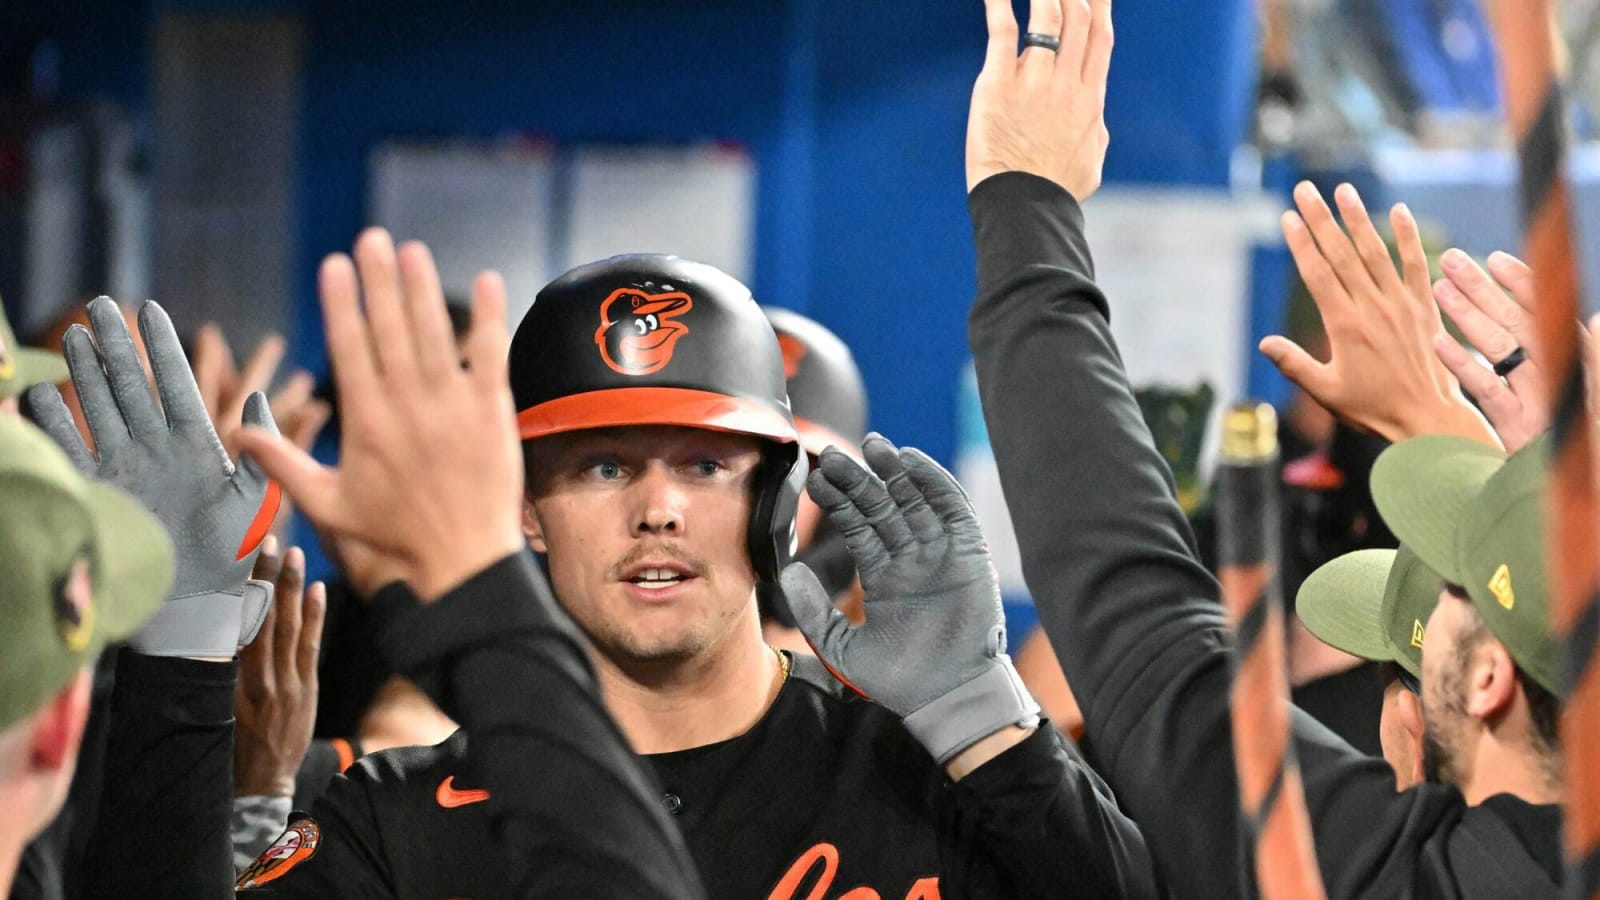 Next Up: A divisional battle with the first-place Baltimore Orioles